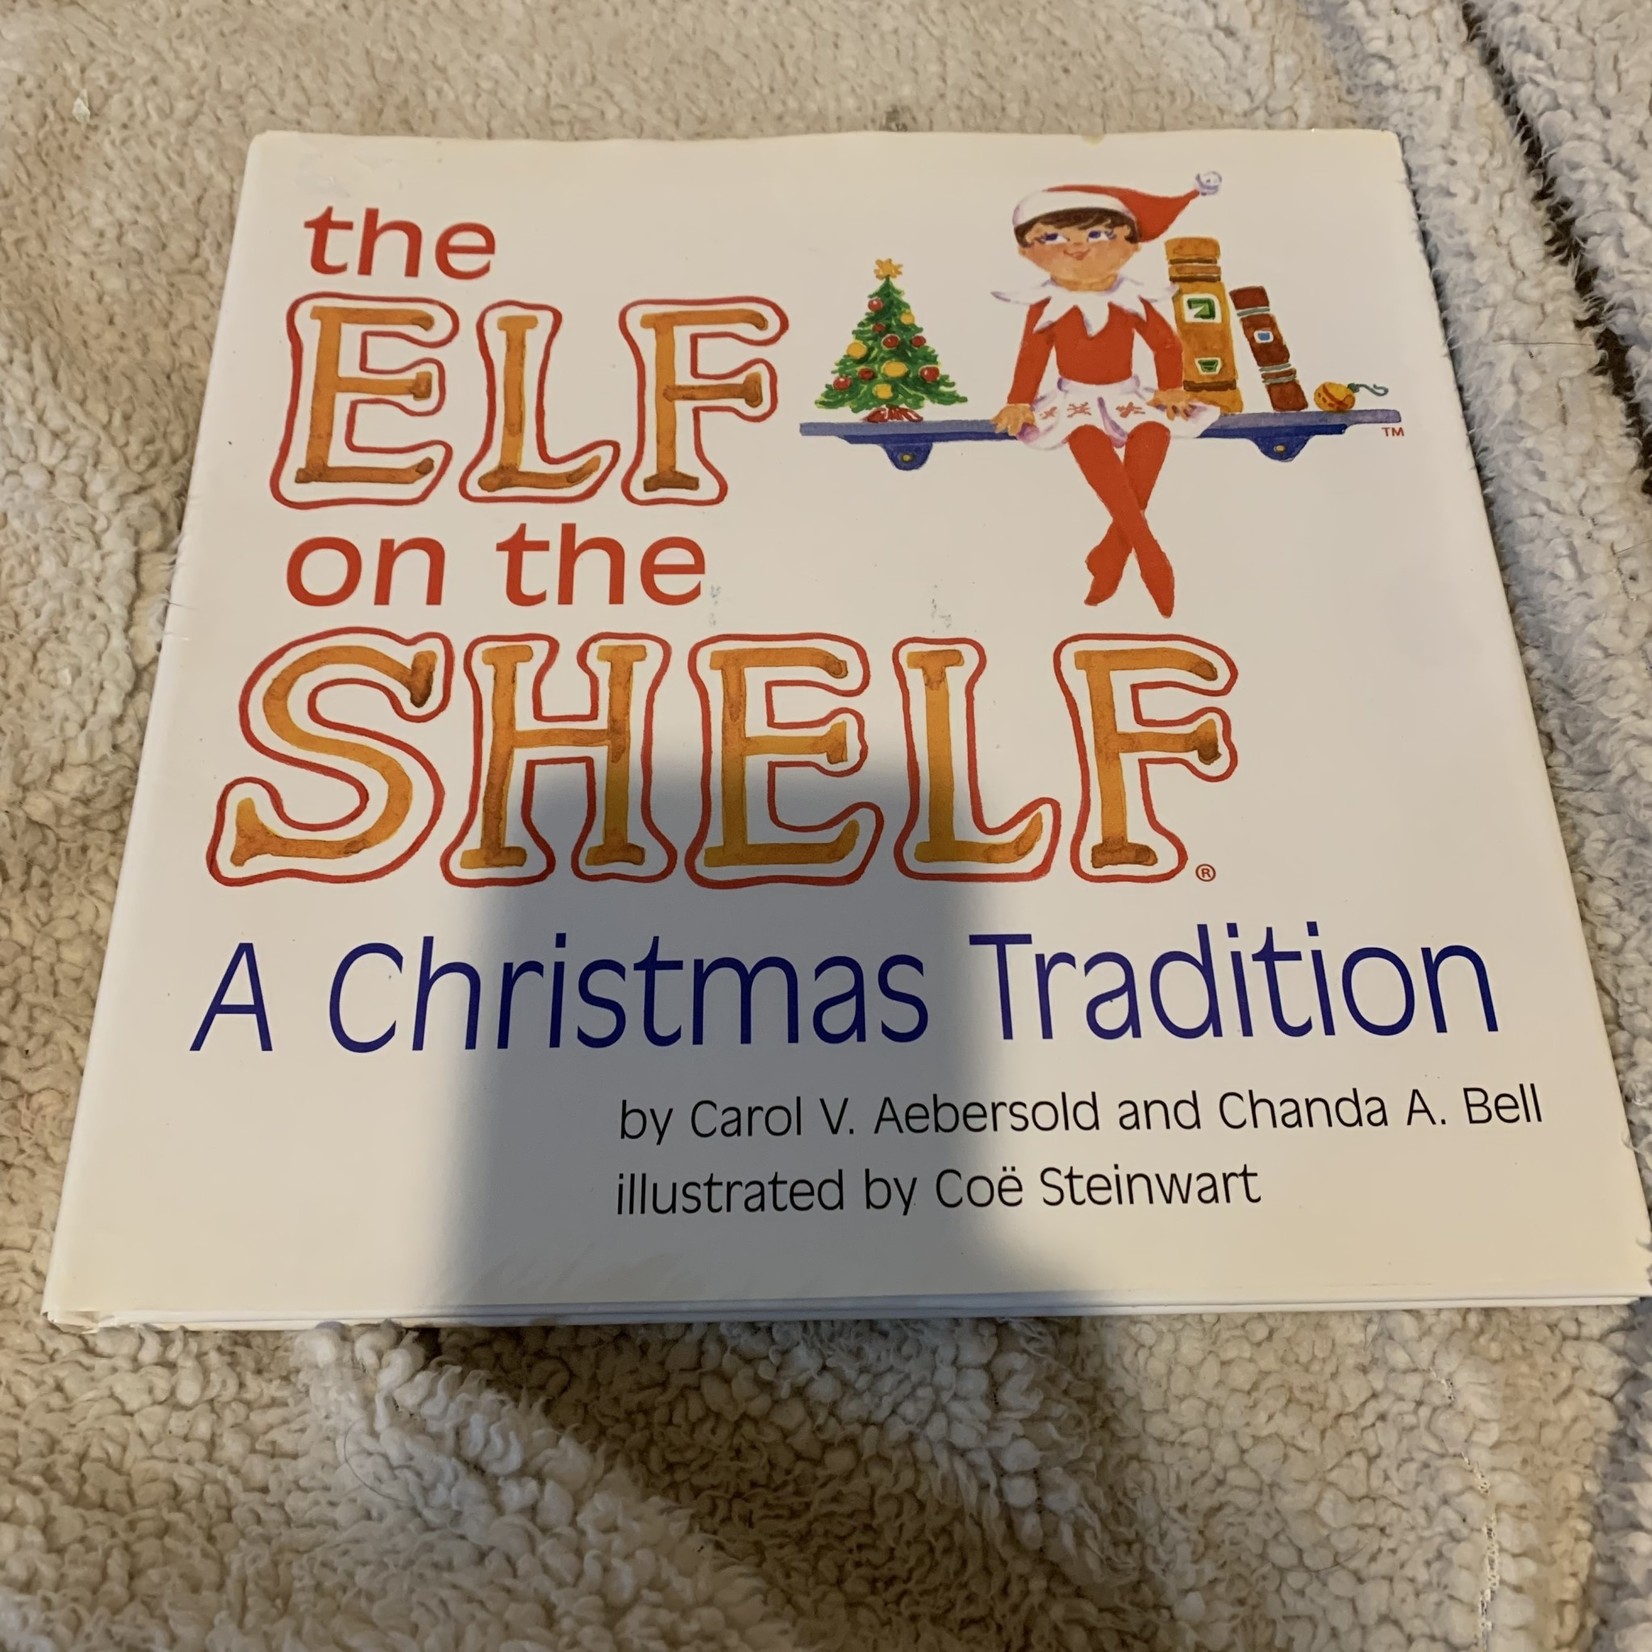 The Elf on the Shelf - A Christmas Tradition